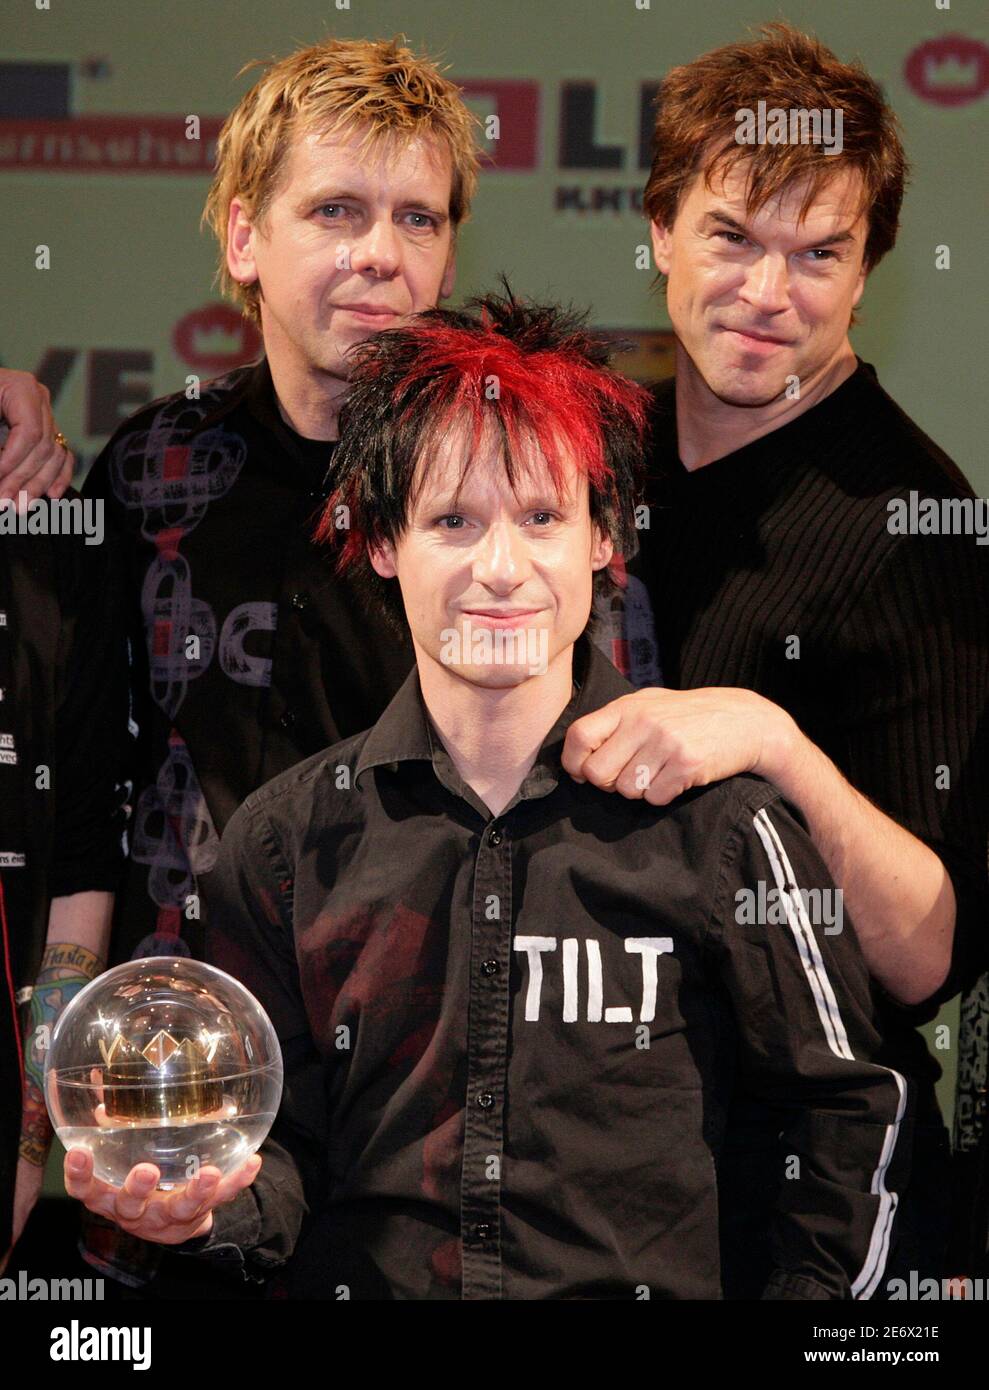 Members of German punk band "Die Toten Hosen" pose with their lifetime  achievement award at the "Eins Live Krone 2007", Germany's biggest radio  award, in the town of Bochum December 6, 2007.